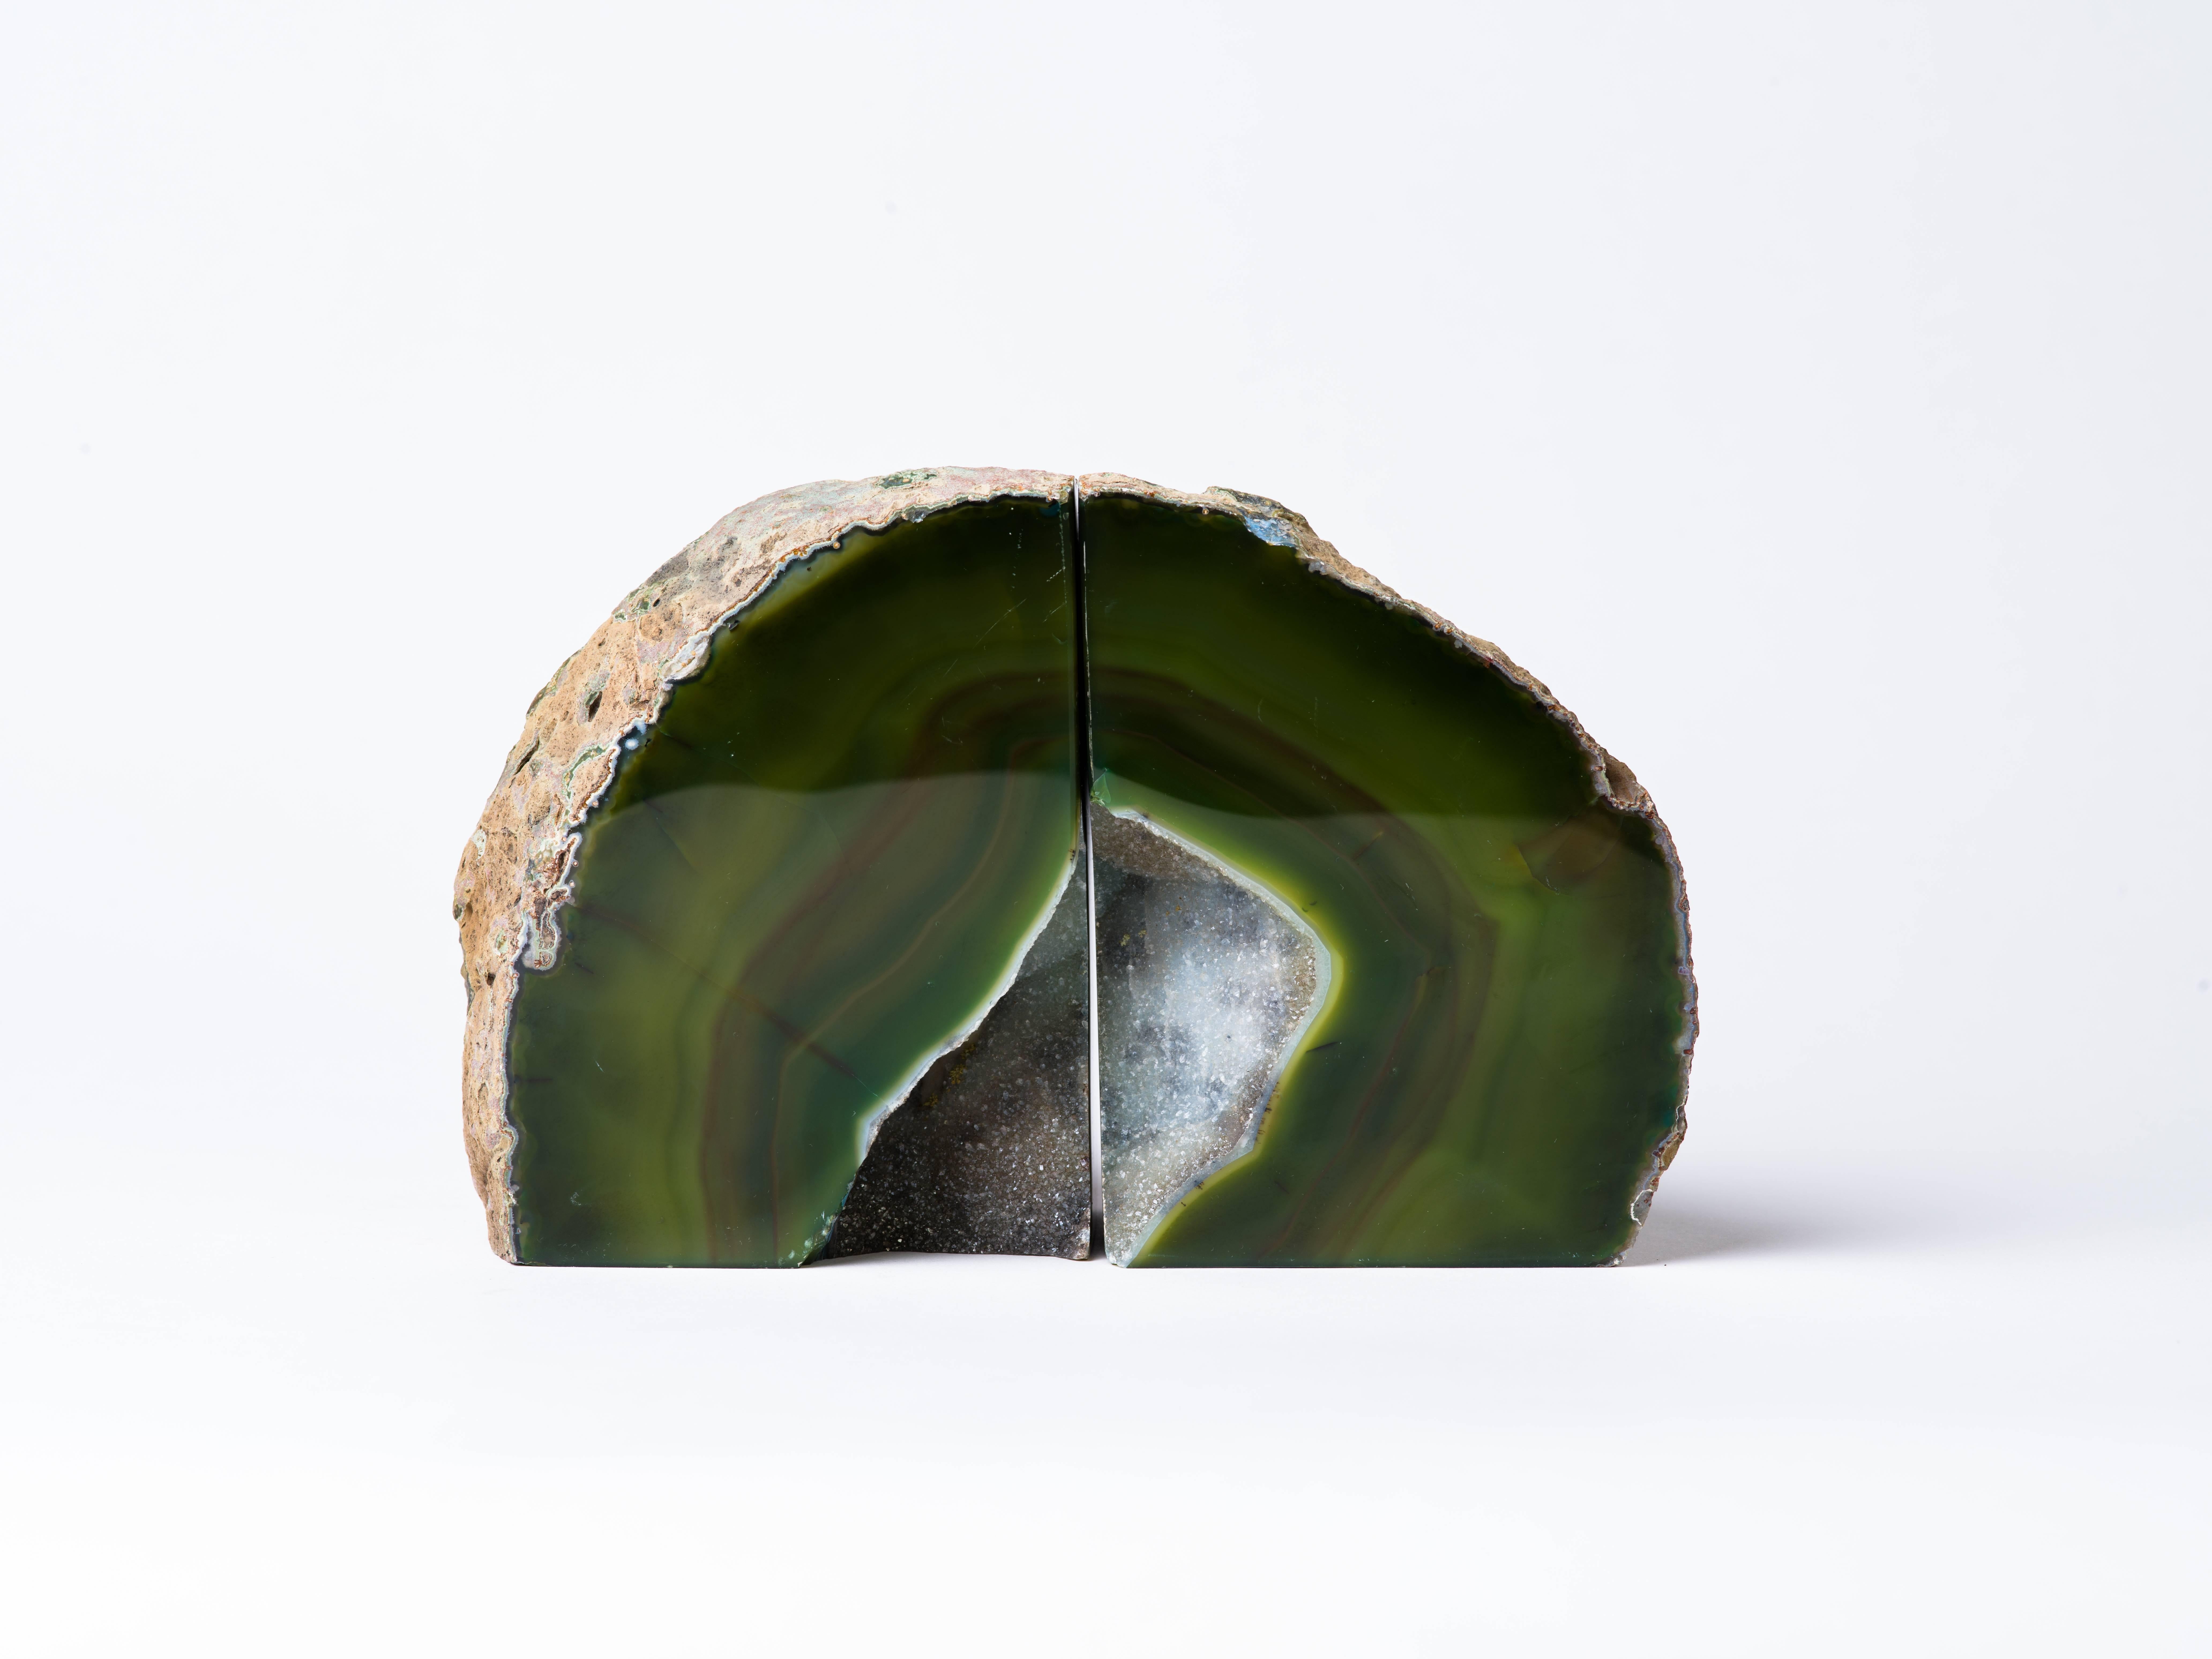 Brazilian Pair of Organic Modern Agate and Crystal Bookends in Moss Green